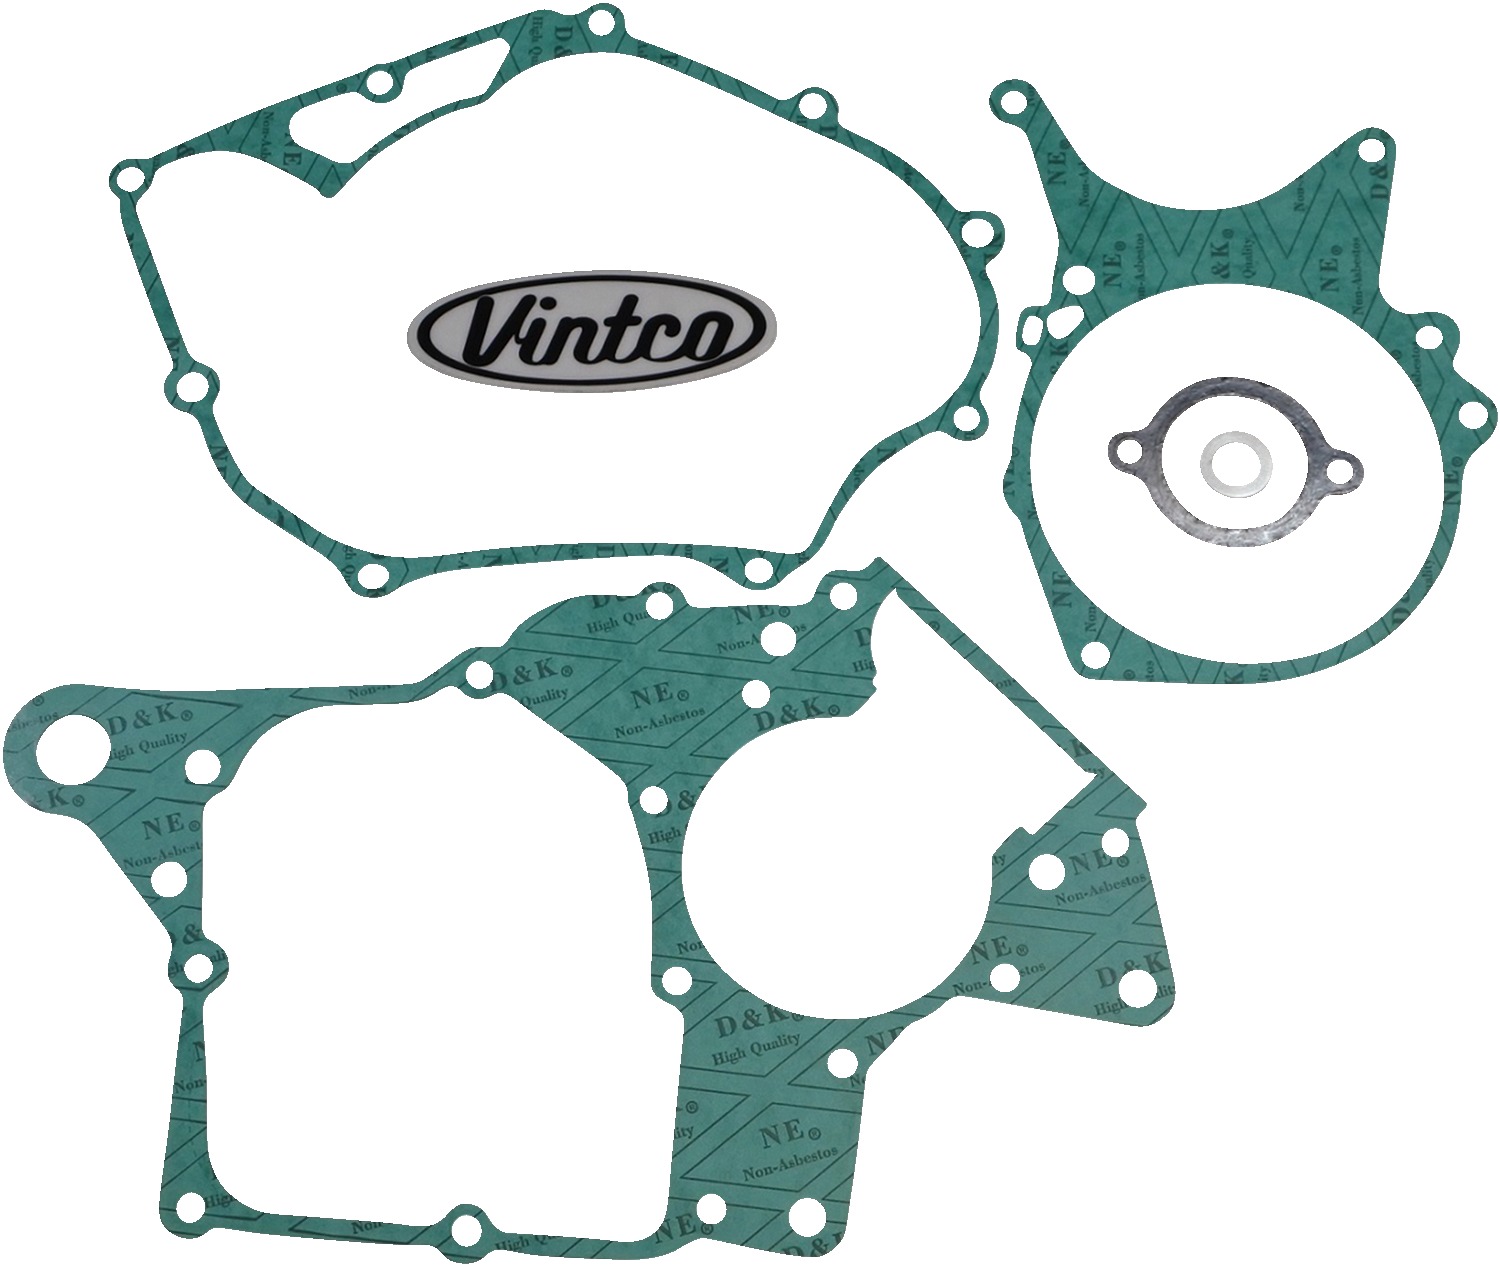 Lower Engine Gasket Kit - For 80-81 Honda CR80R - Click Image to Close